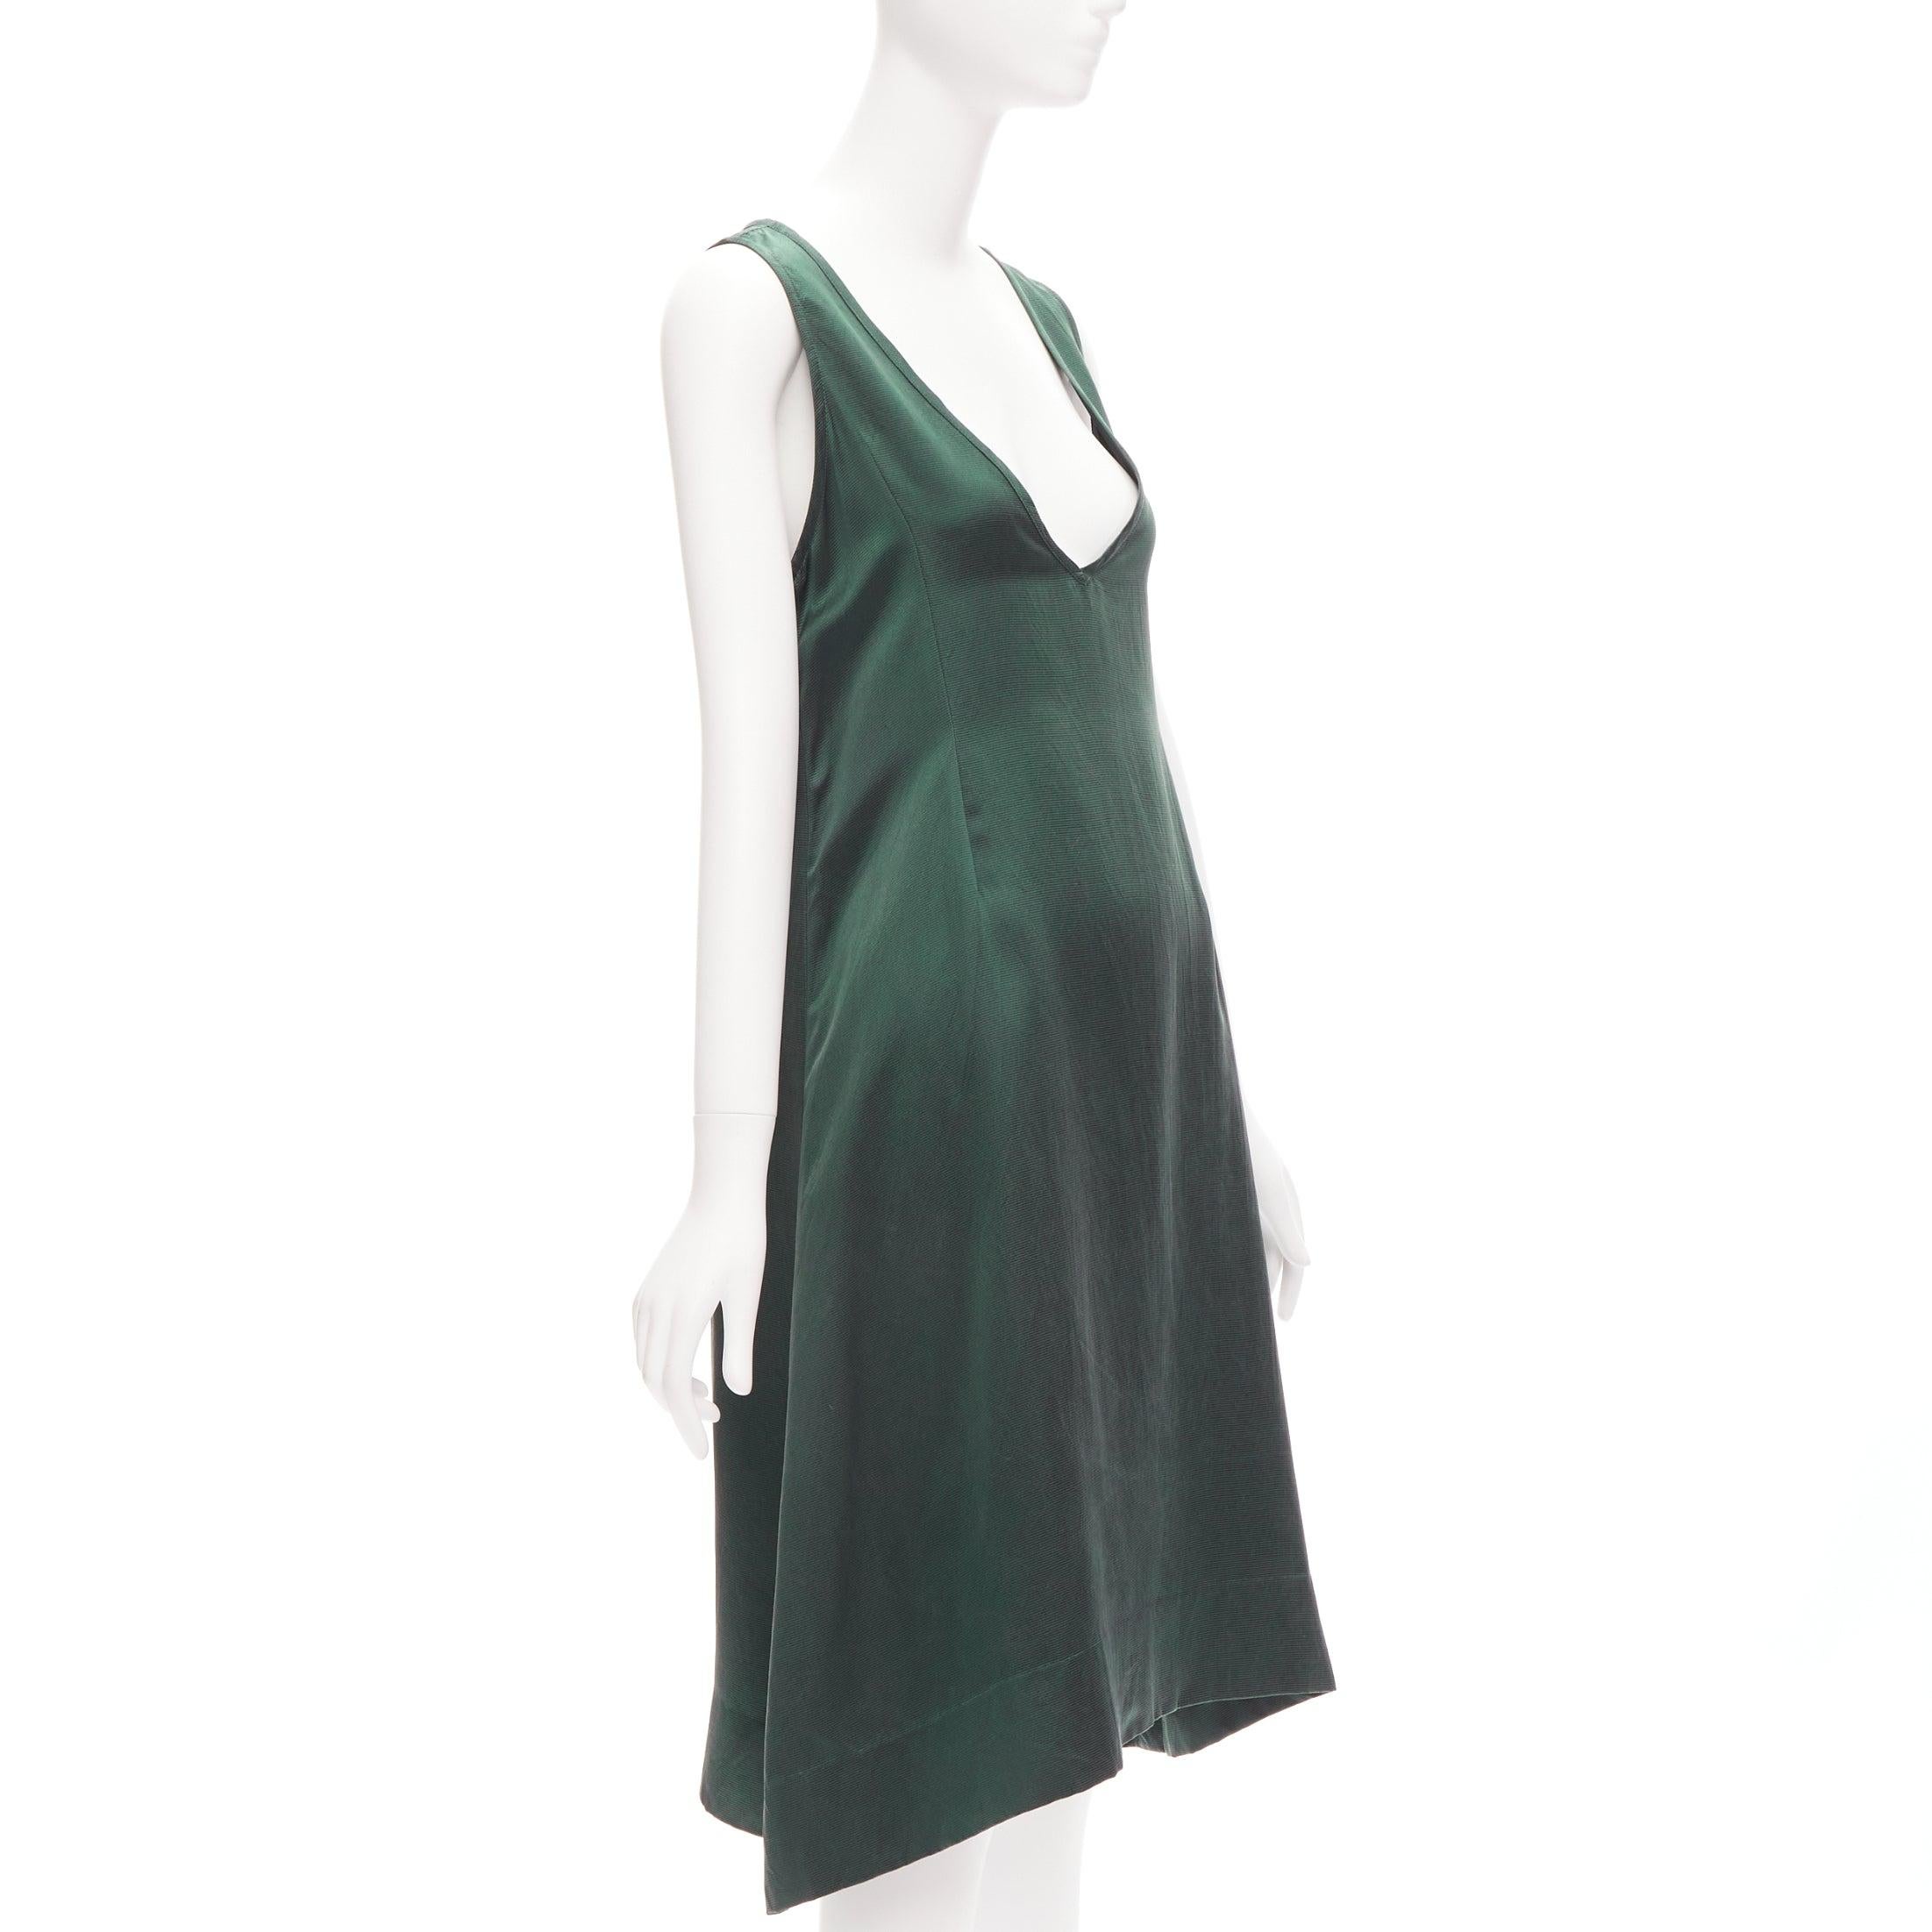 DRIES VAN NOTEN 100% silk dark green plunge neck sleeveless trapeze dress S
Reference: CELG/A00283
Brand: Dries Van Noten
Material: Silk
Color: Green
Pattern: Solid
Closure: Slip On
Extra Details: Unlined.
Made in: Belgium

CONDITION:
Condition: